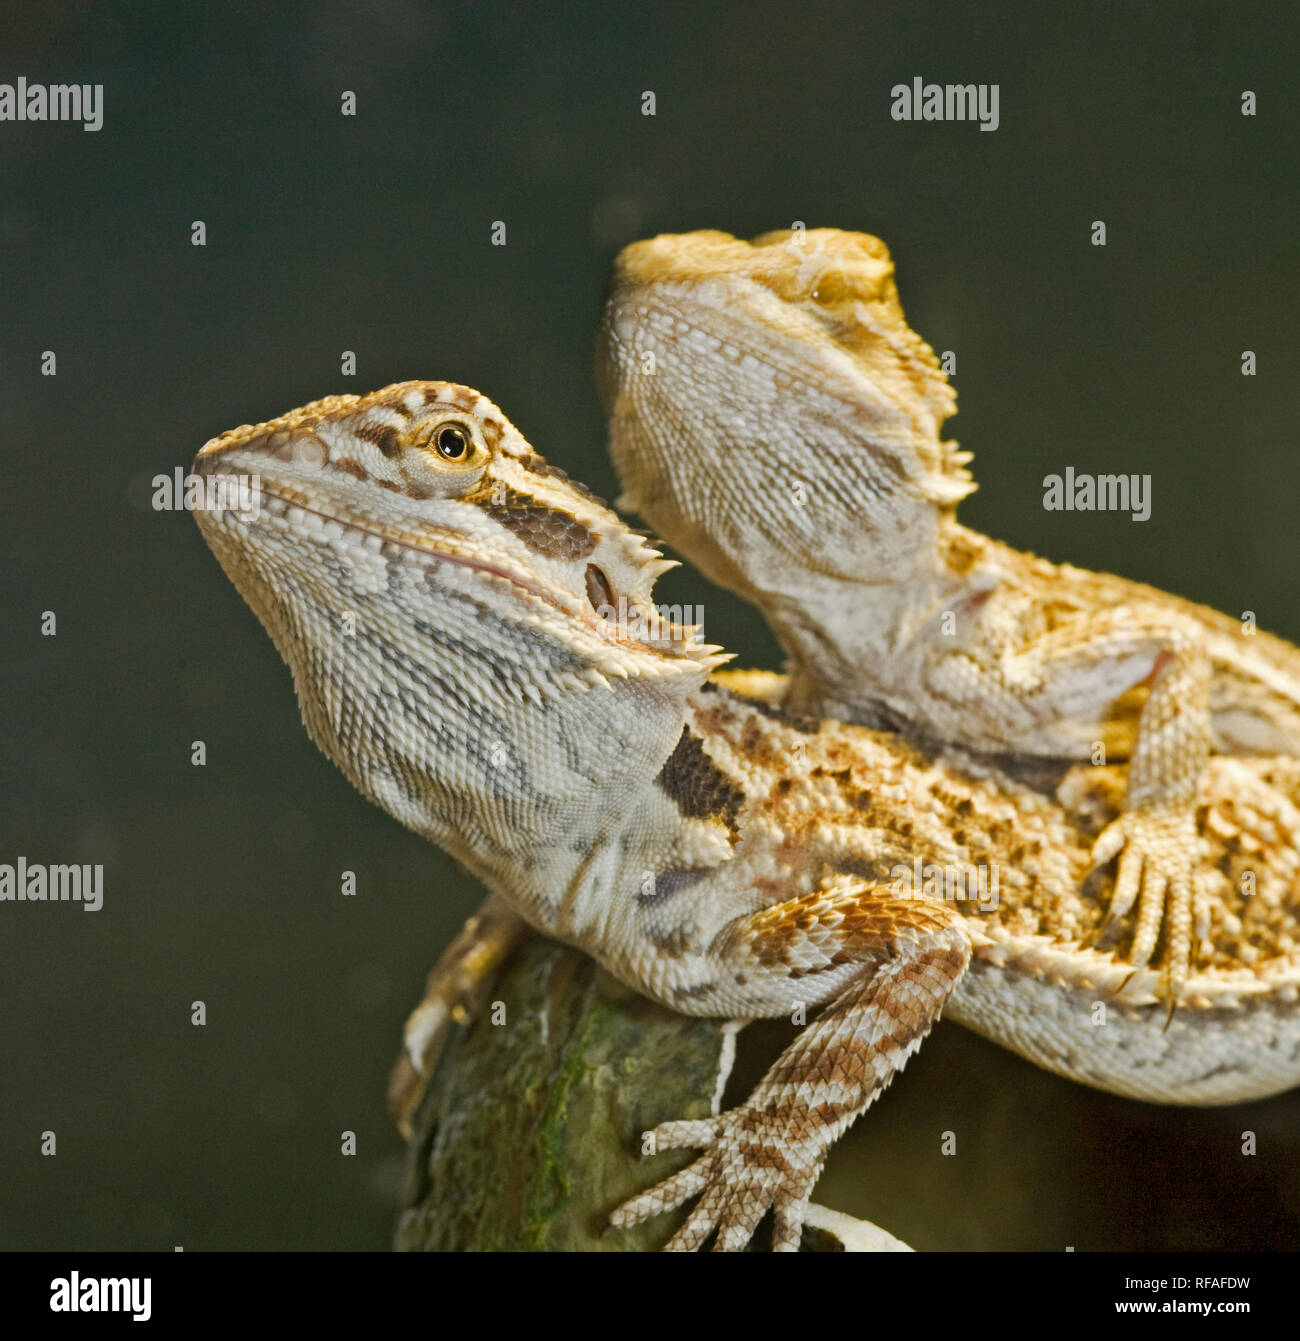 A pair of bearded dragon lizards, common in the bushland of Australia. Stock Photo